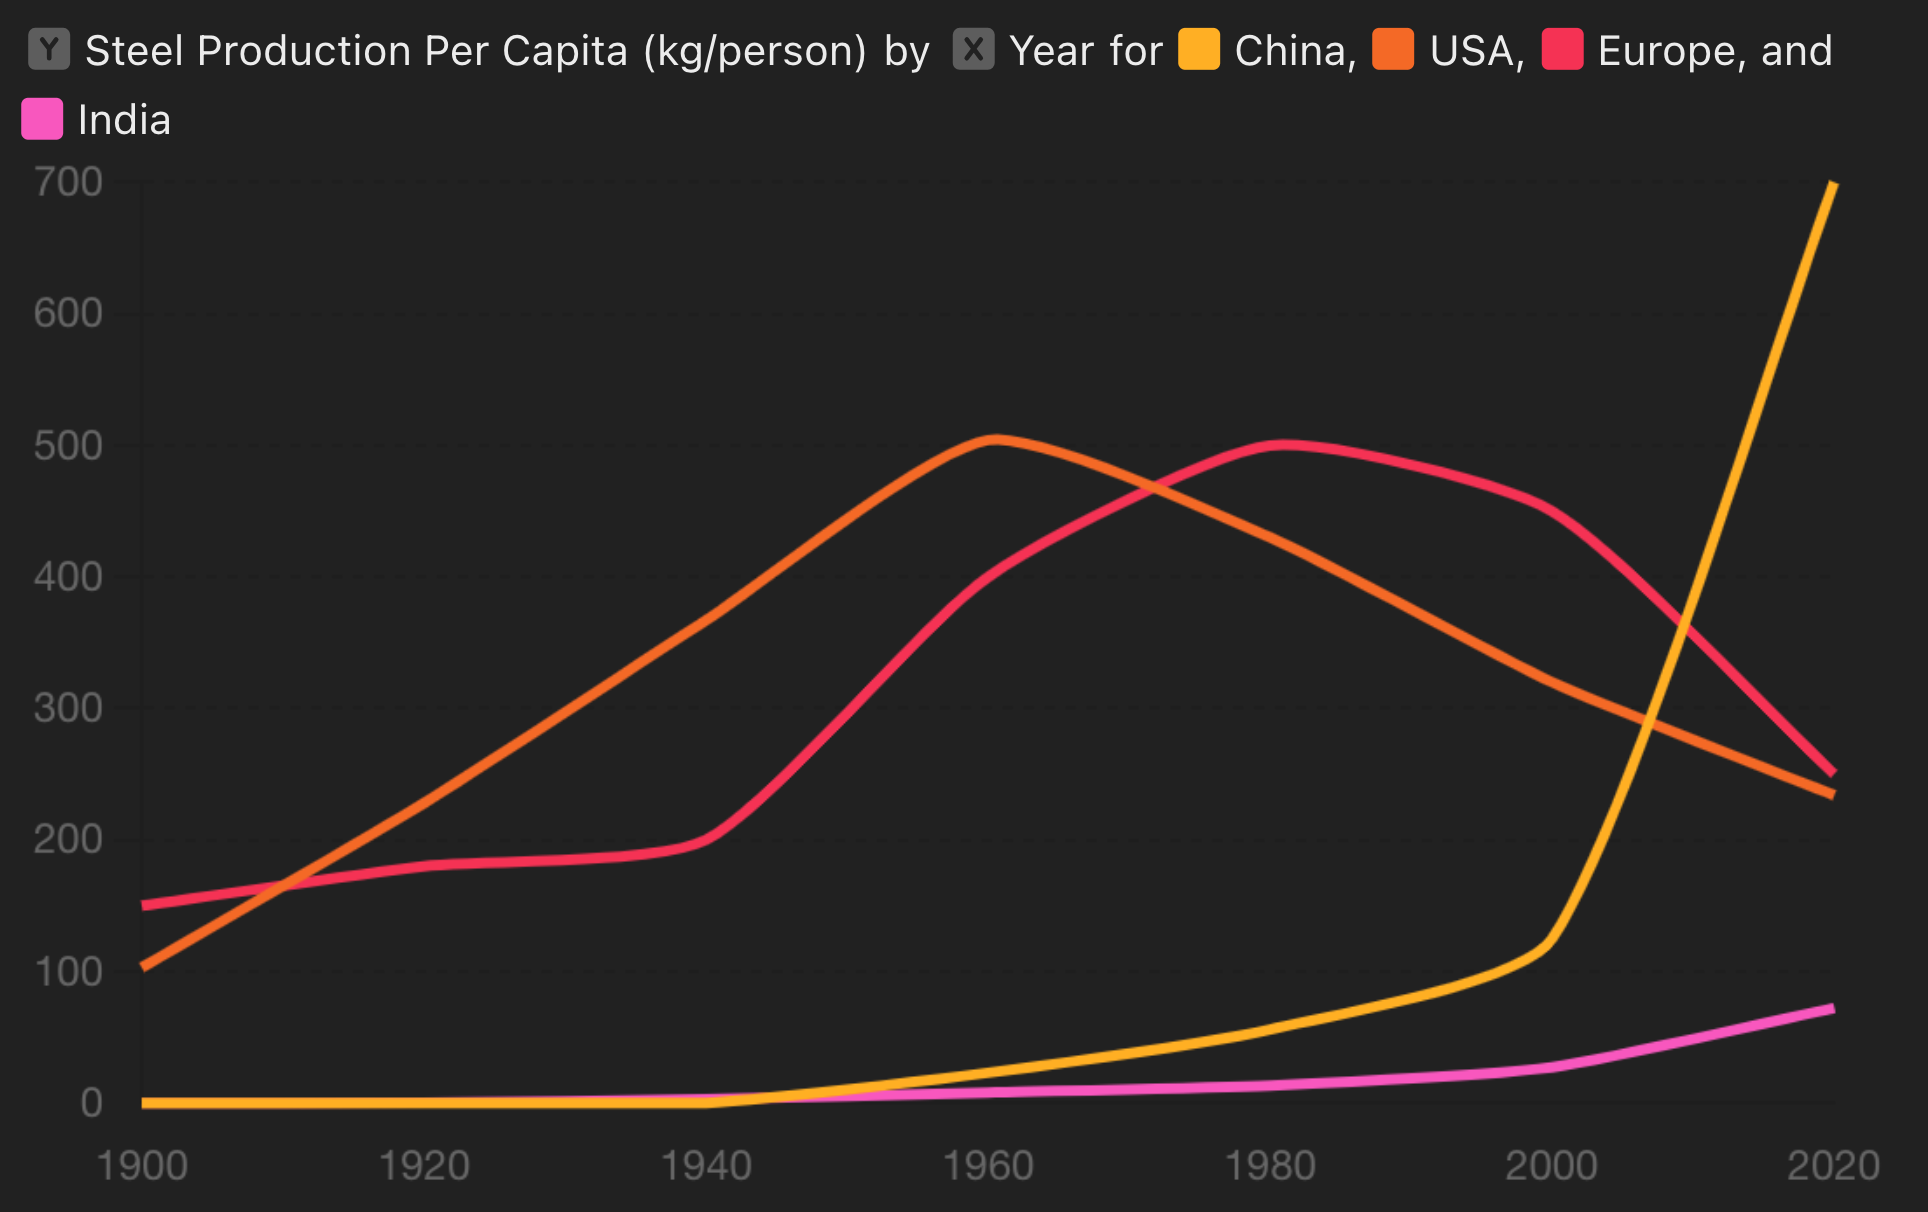 Steel per capita for major industrialized countries from 1900 to 2020 by author